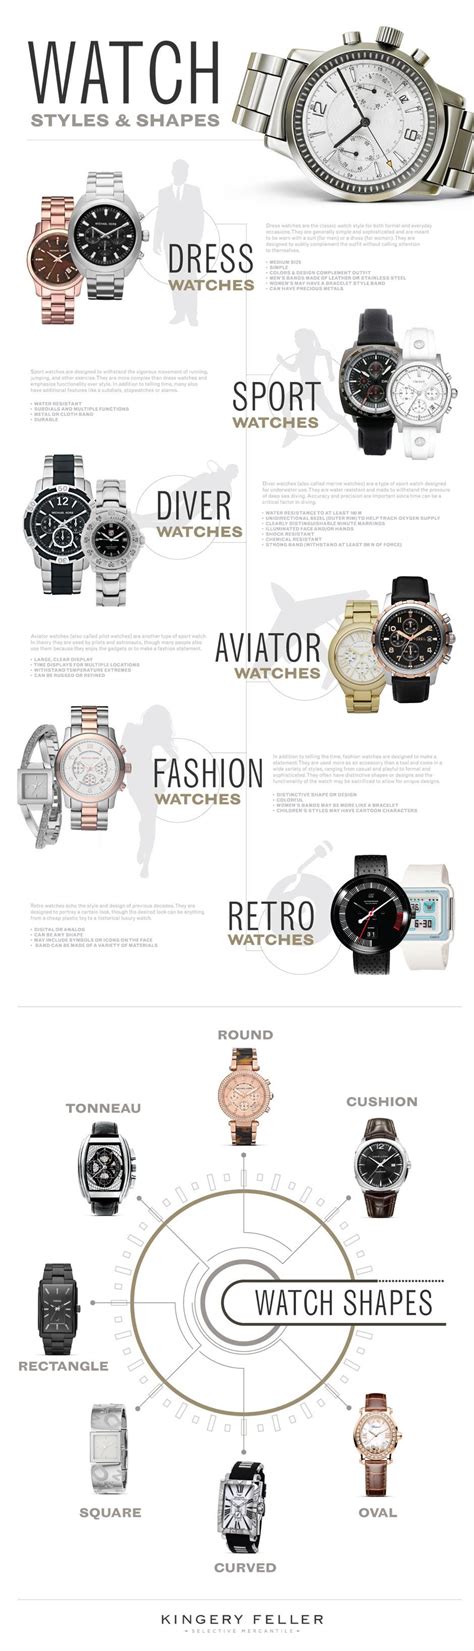 Pin By Mohan Aapte On Fashion Watches Fashion Watches Mens Watches